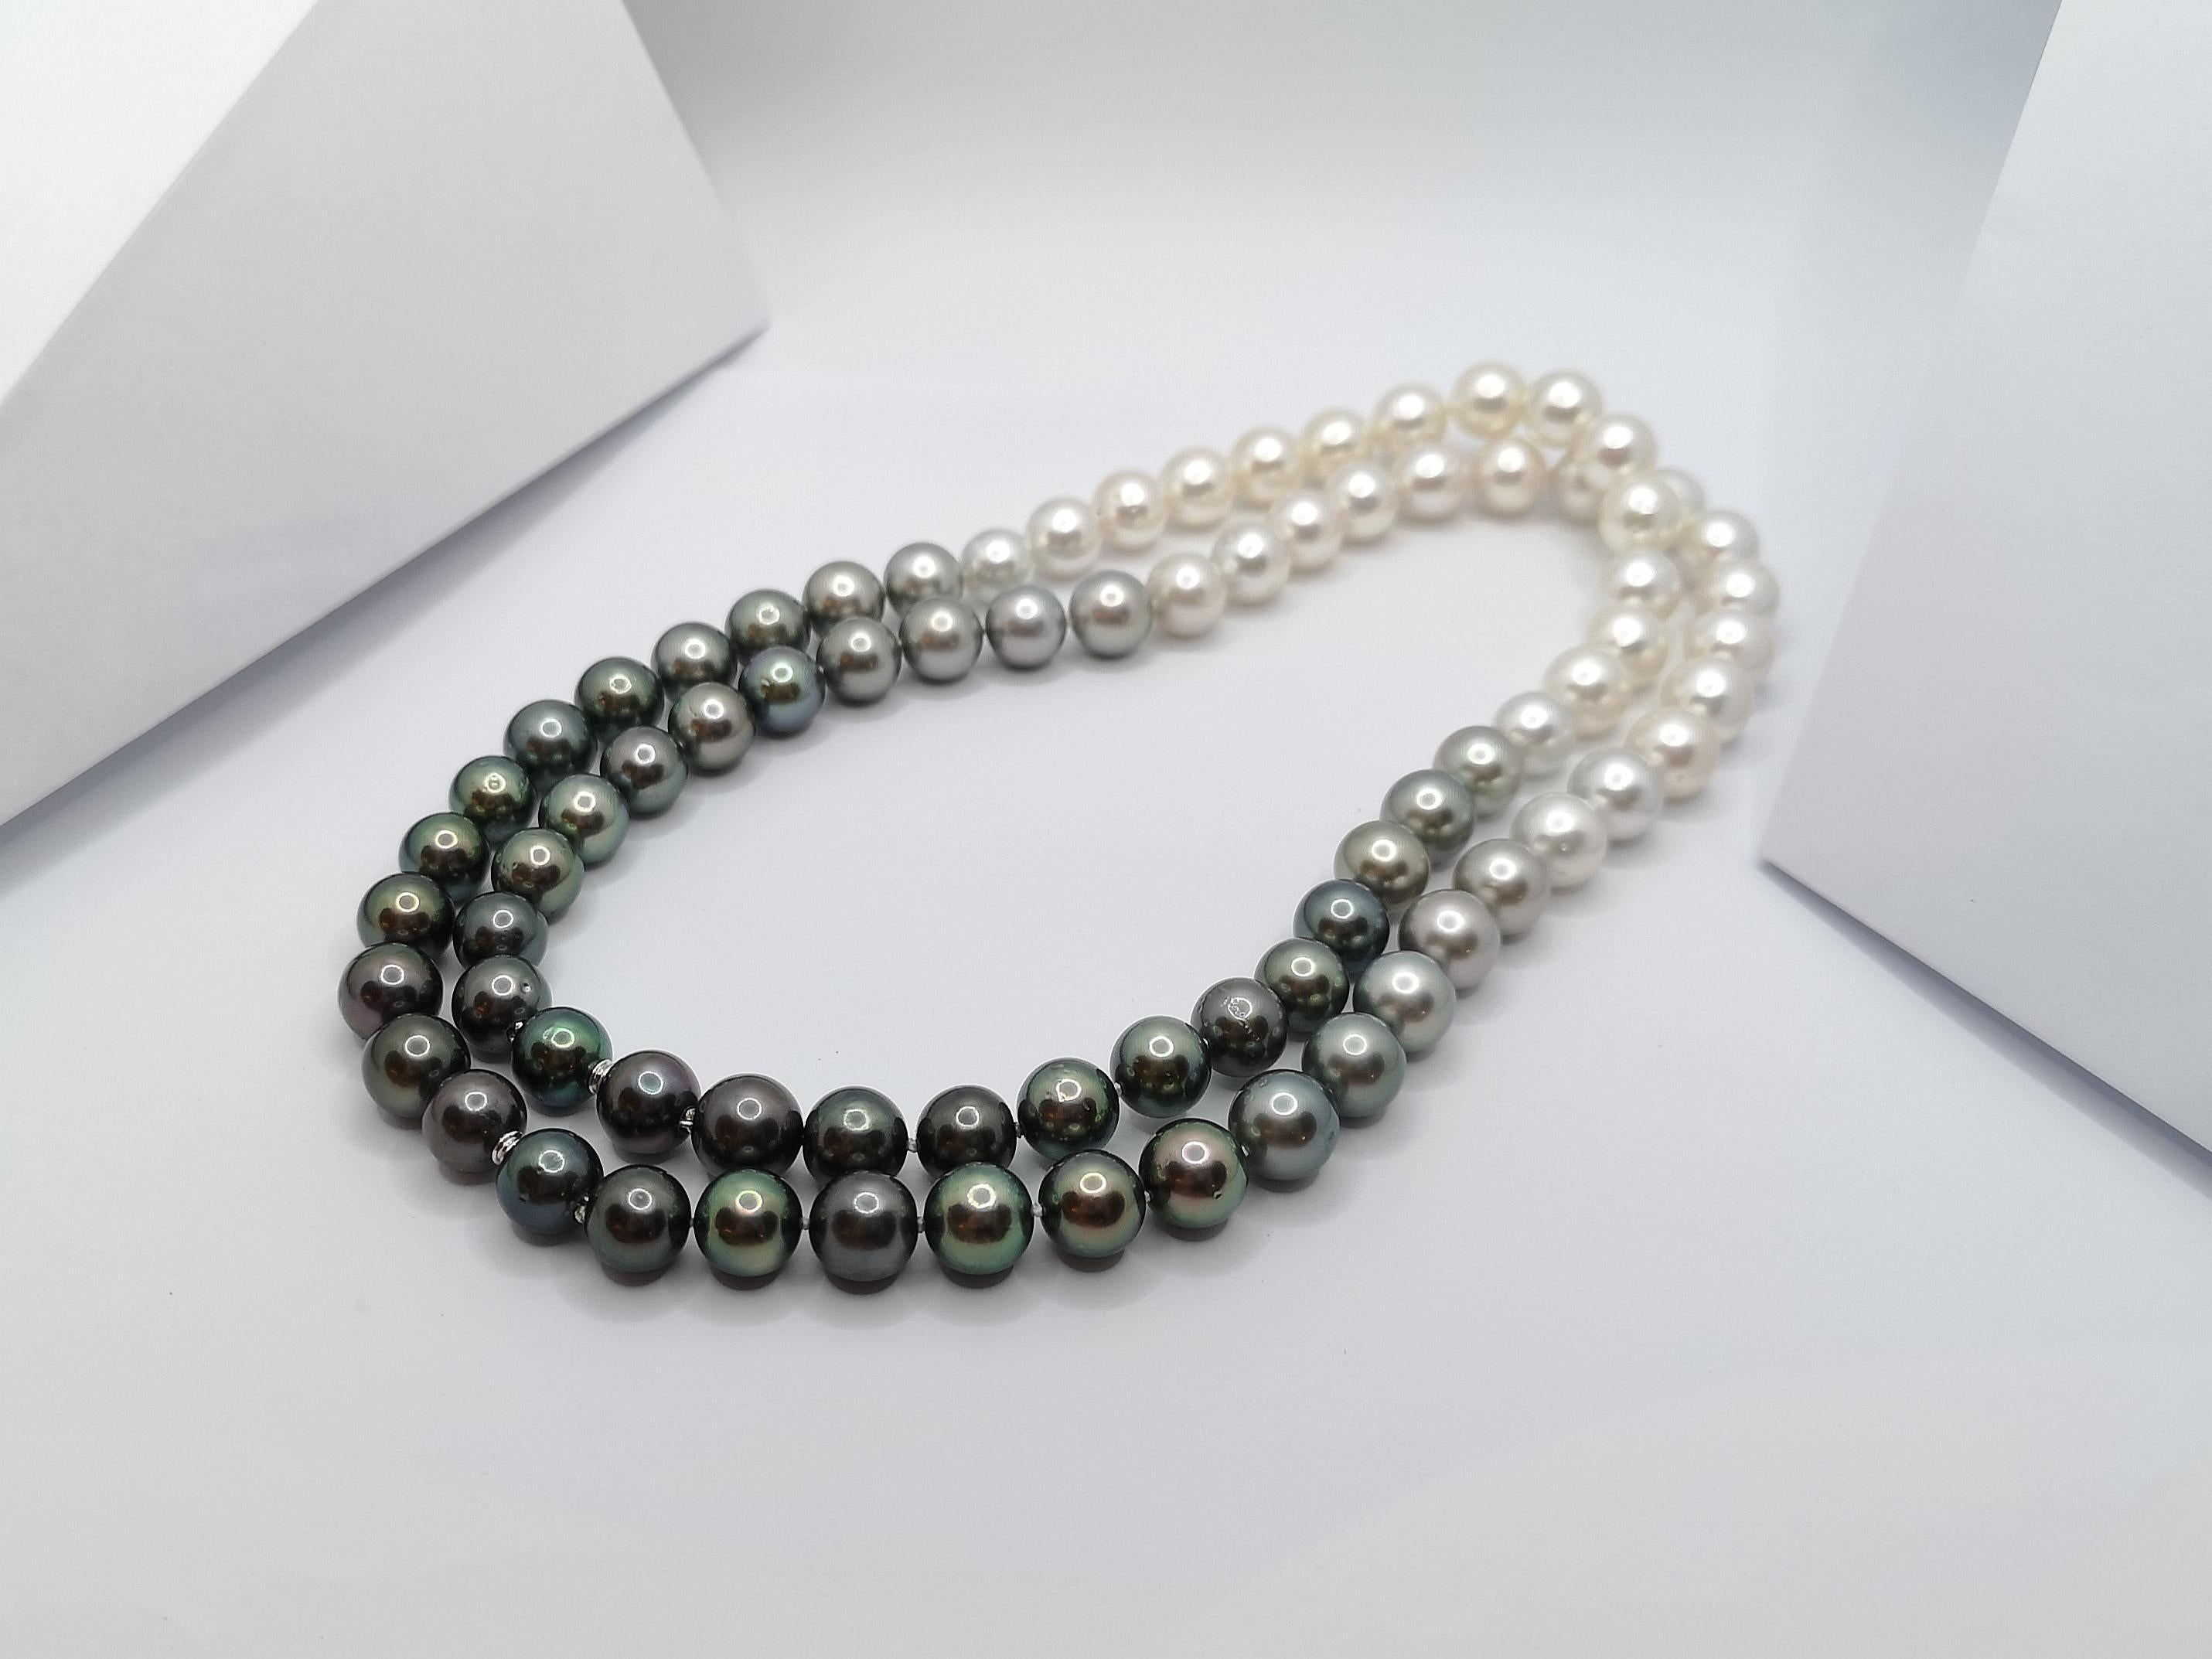 Gradutated Color South Sea Pearl Necklace with Hidden 18K White Gold Clasp For Sale 3